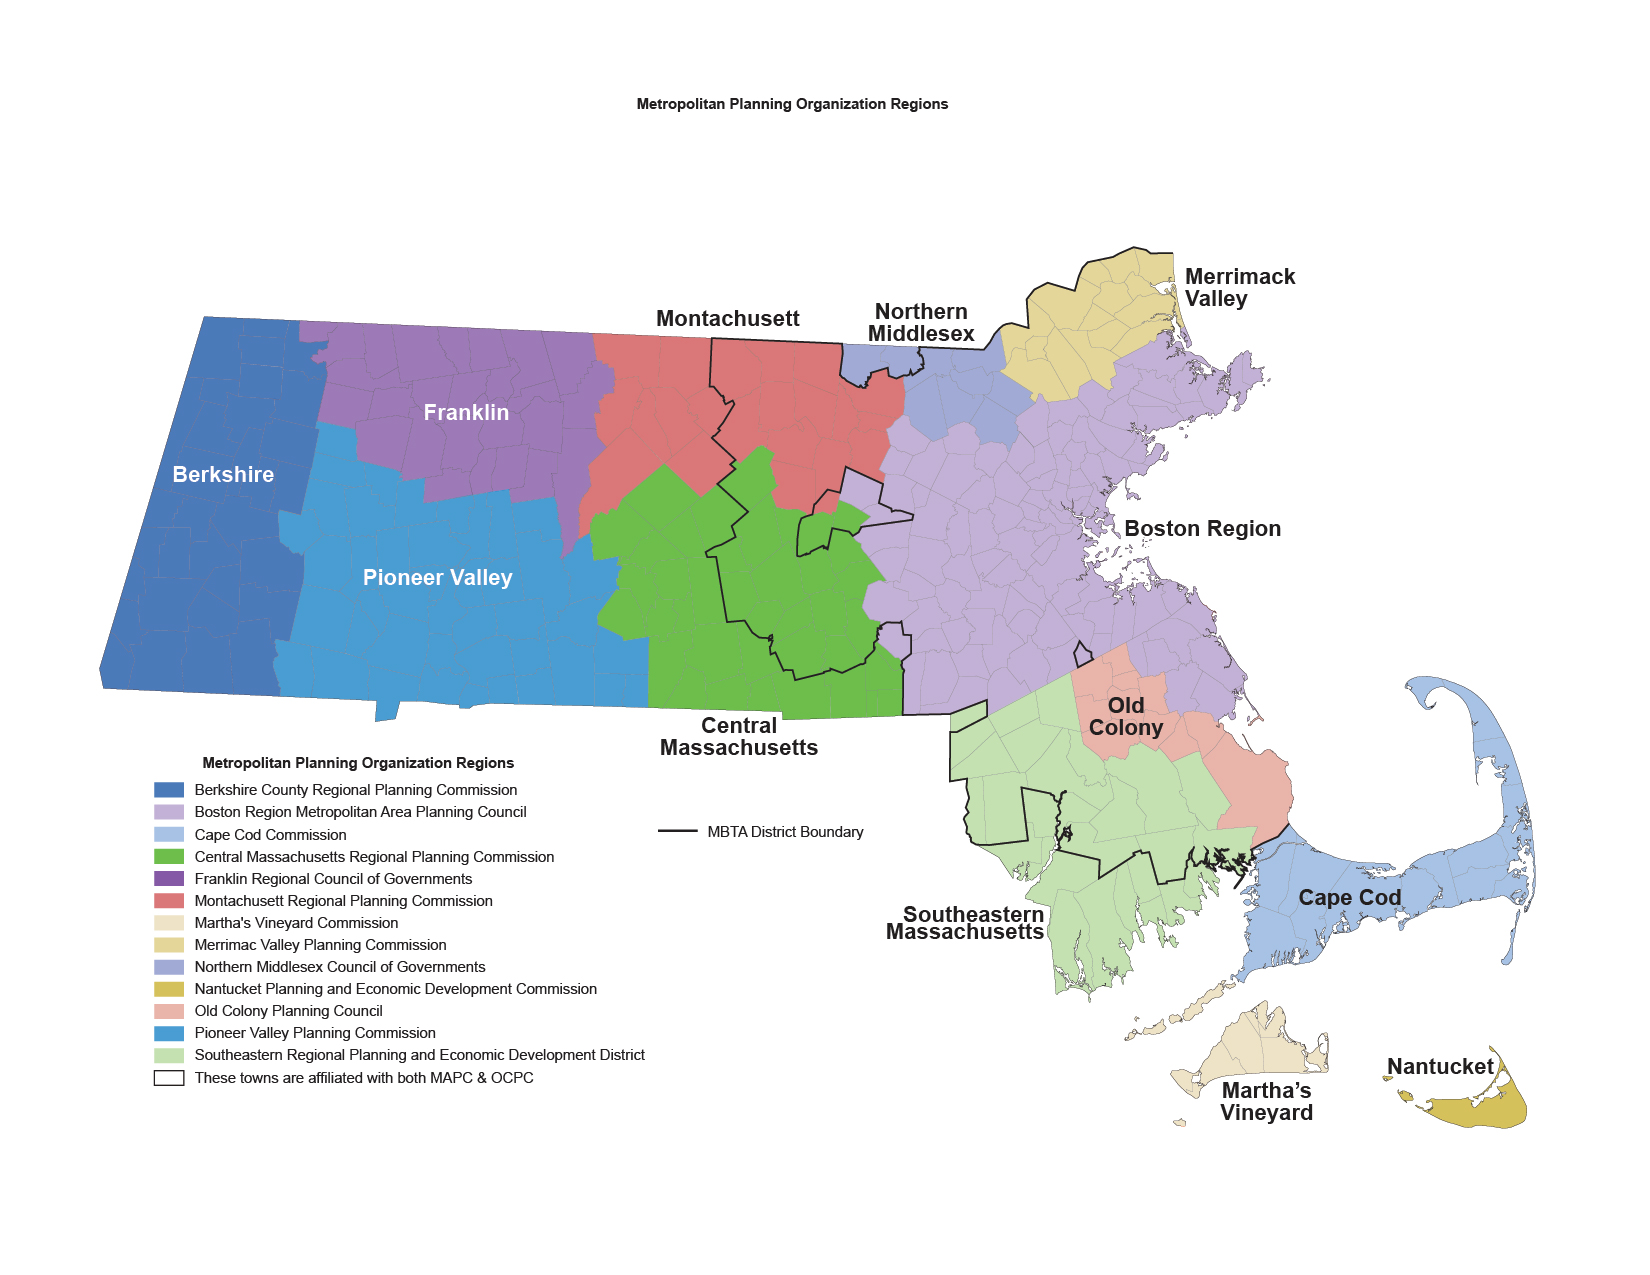 Figure 3 is a map of the MPO regions, color coded as follows: dark blue = Berkshire County Regional Planning Commission; mauve = Boston Region Metropolitan Area Planning Council; light blue = Cape Cod Commission; dark green = Central Massachusetts Regional Planning Commission; purple = Franklin Regional Council of Governments; dark pink = Montachusett Regional Planning Commission; sand = Martha's Vineyard Commission; beige = Merrimac Valley Planning Commission; lavender = Northern Middlesex Council of Governments; ochre = Nantucket Planning and Economic Development Commission; light pink = Old Colony Planning Council; cerulean = Pioneer Valley Planning Commission; light green = Southeastern Regional Planning and Economic Development District; light outline = These towns are affiliated with both MAPC & OCPC; dark outline = MBTA District Boundary.